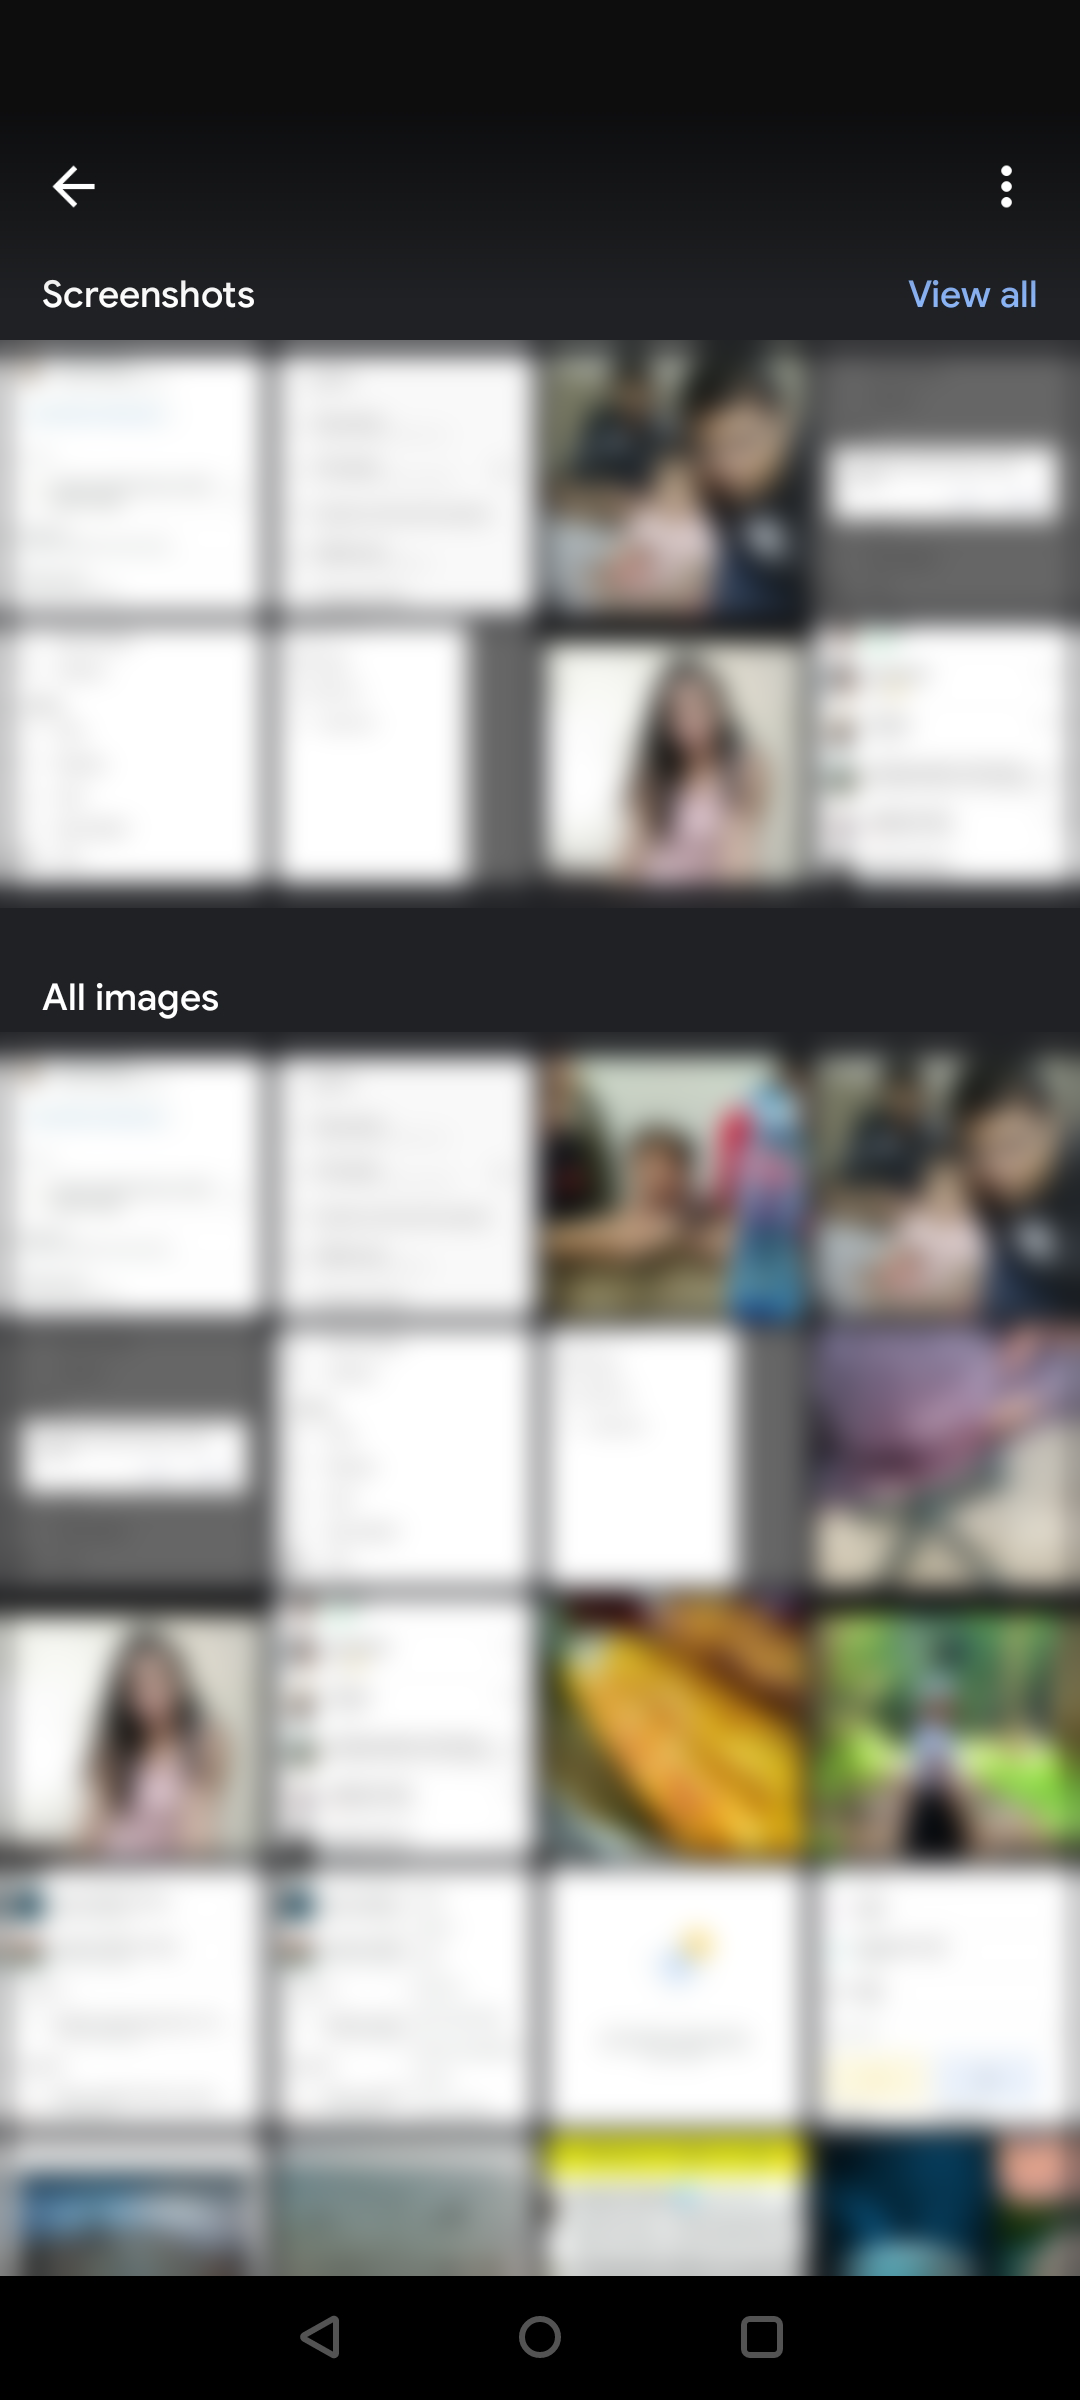 The gallery view in Google Lens